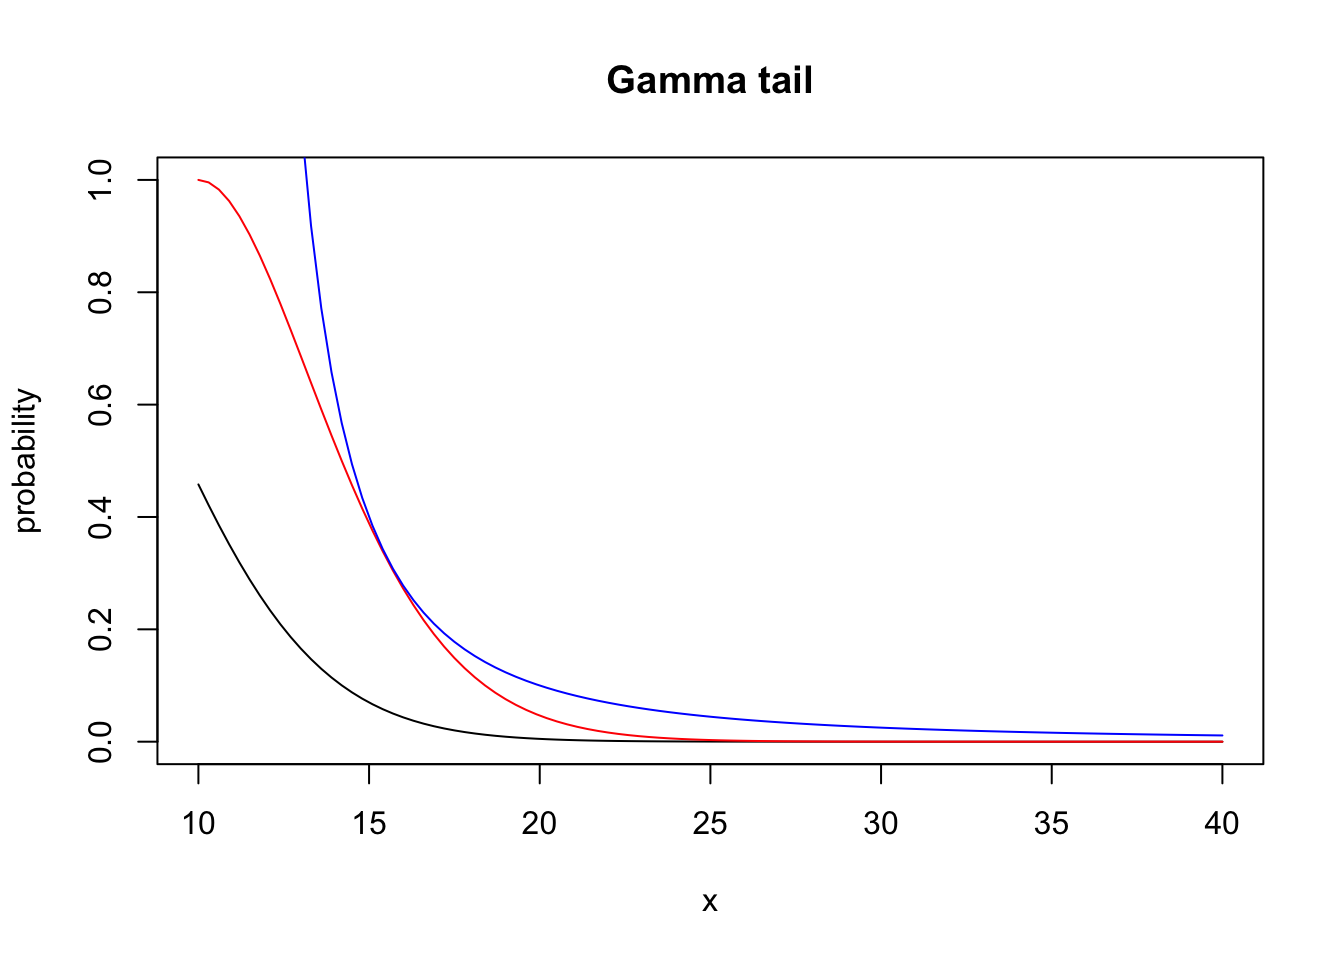 Actual tail probabilities (left) for the gamma distribution, computed via the pgamma function, compared it to the tight bound (red) and the weaker bound from Chebychev’s inequality (blue). The differences in the tail are more clearly seen for the log-probabilities (right)